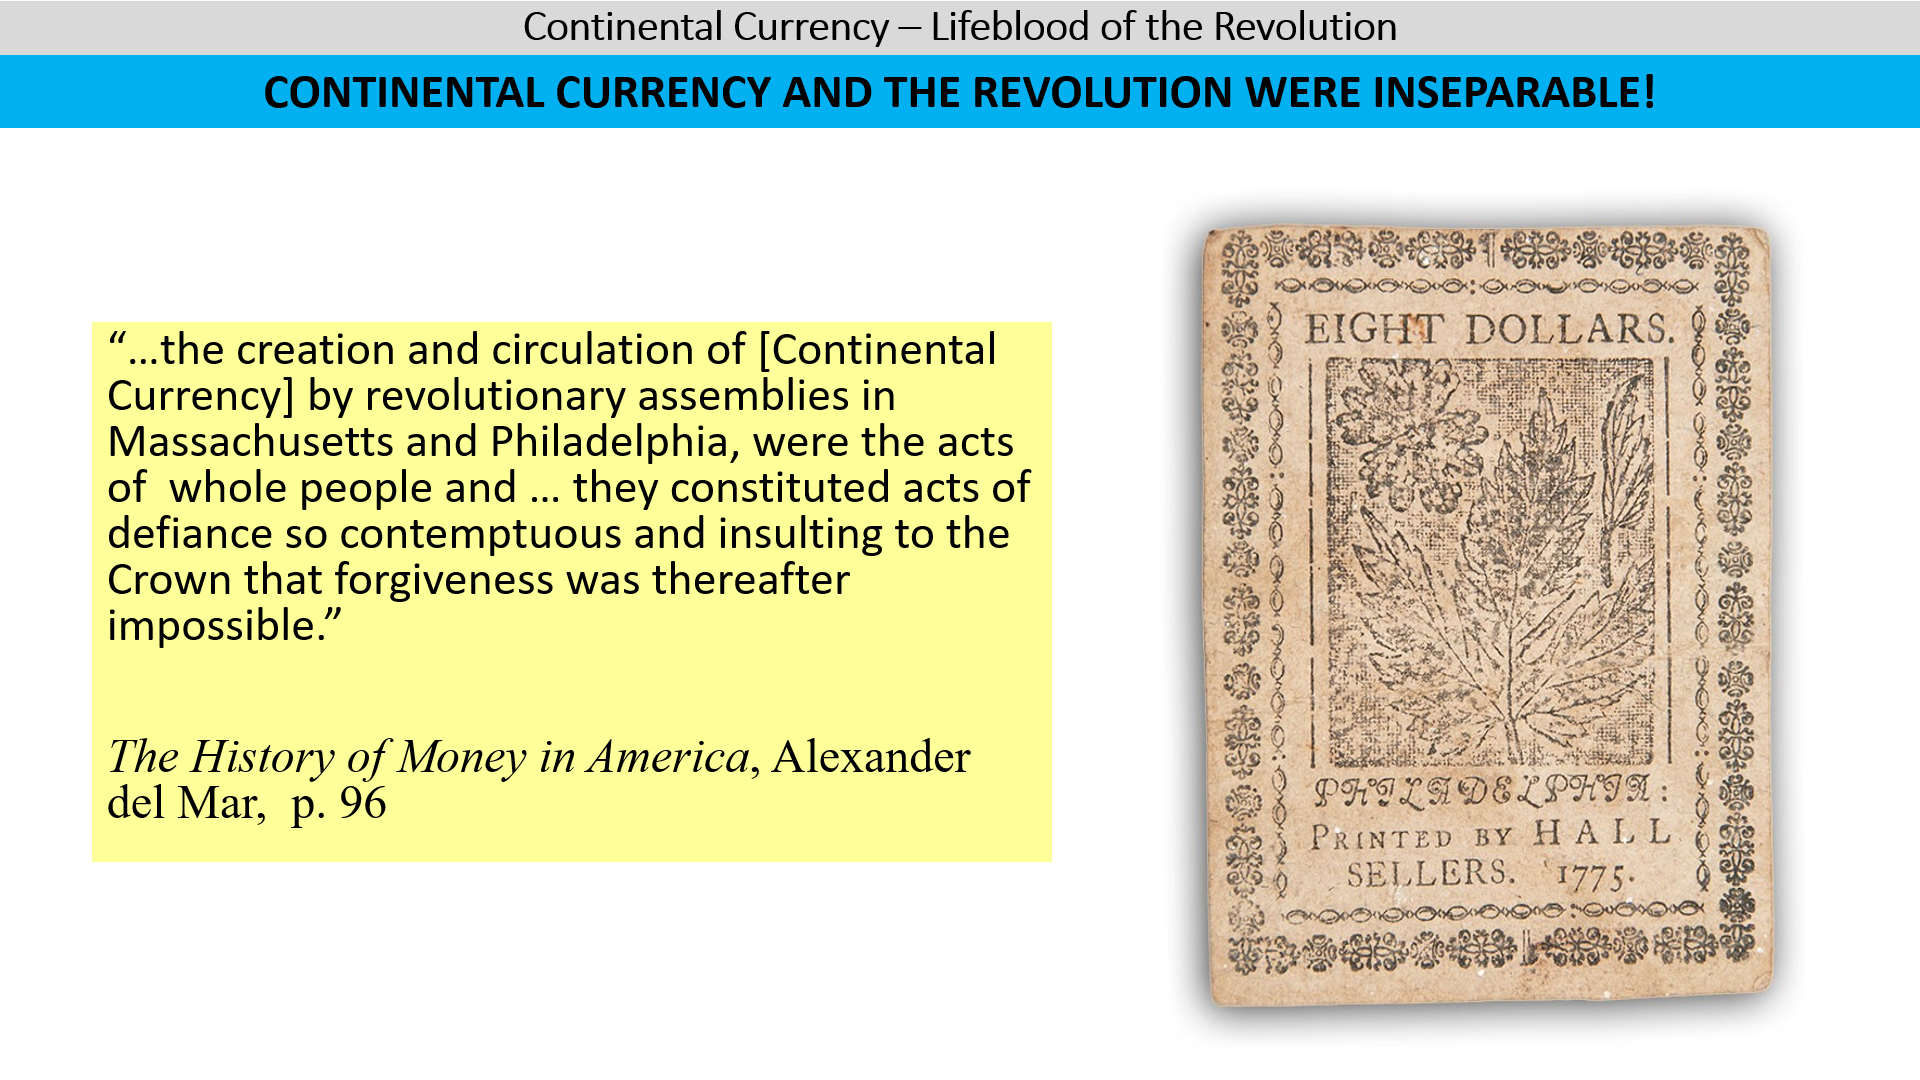 Contentinental Currency